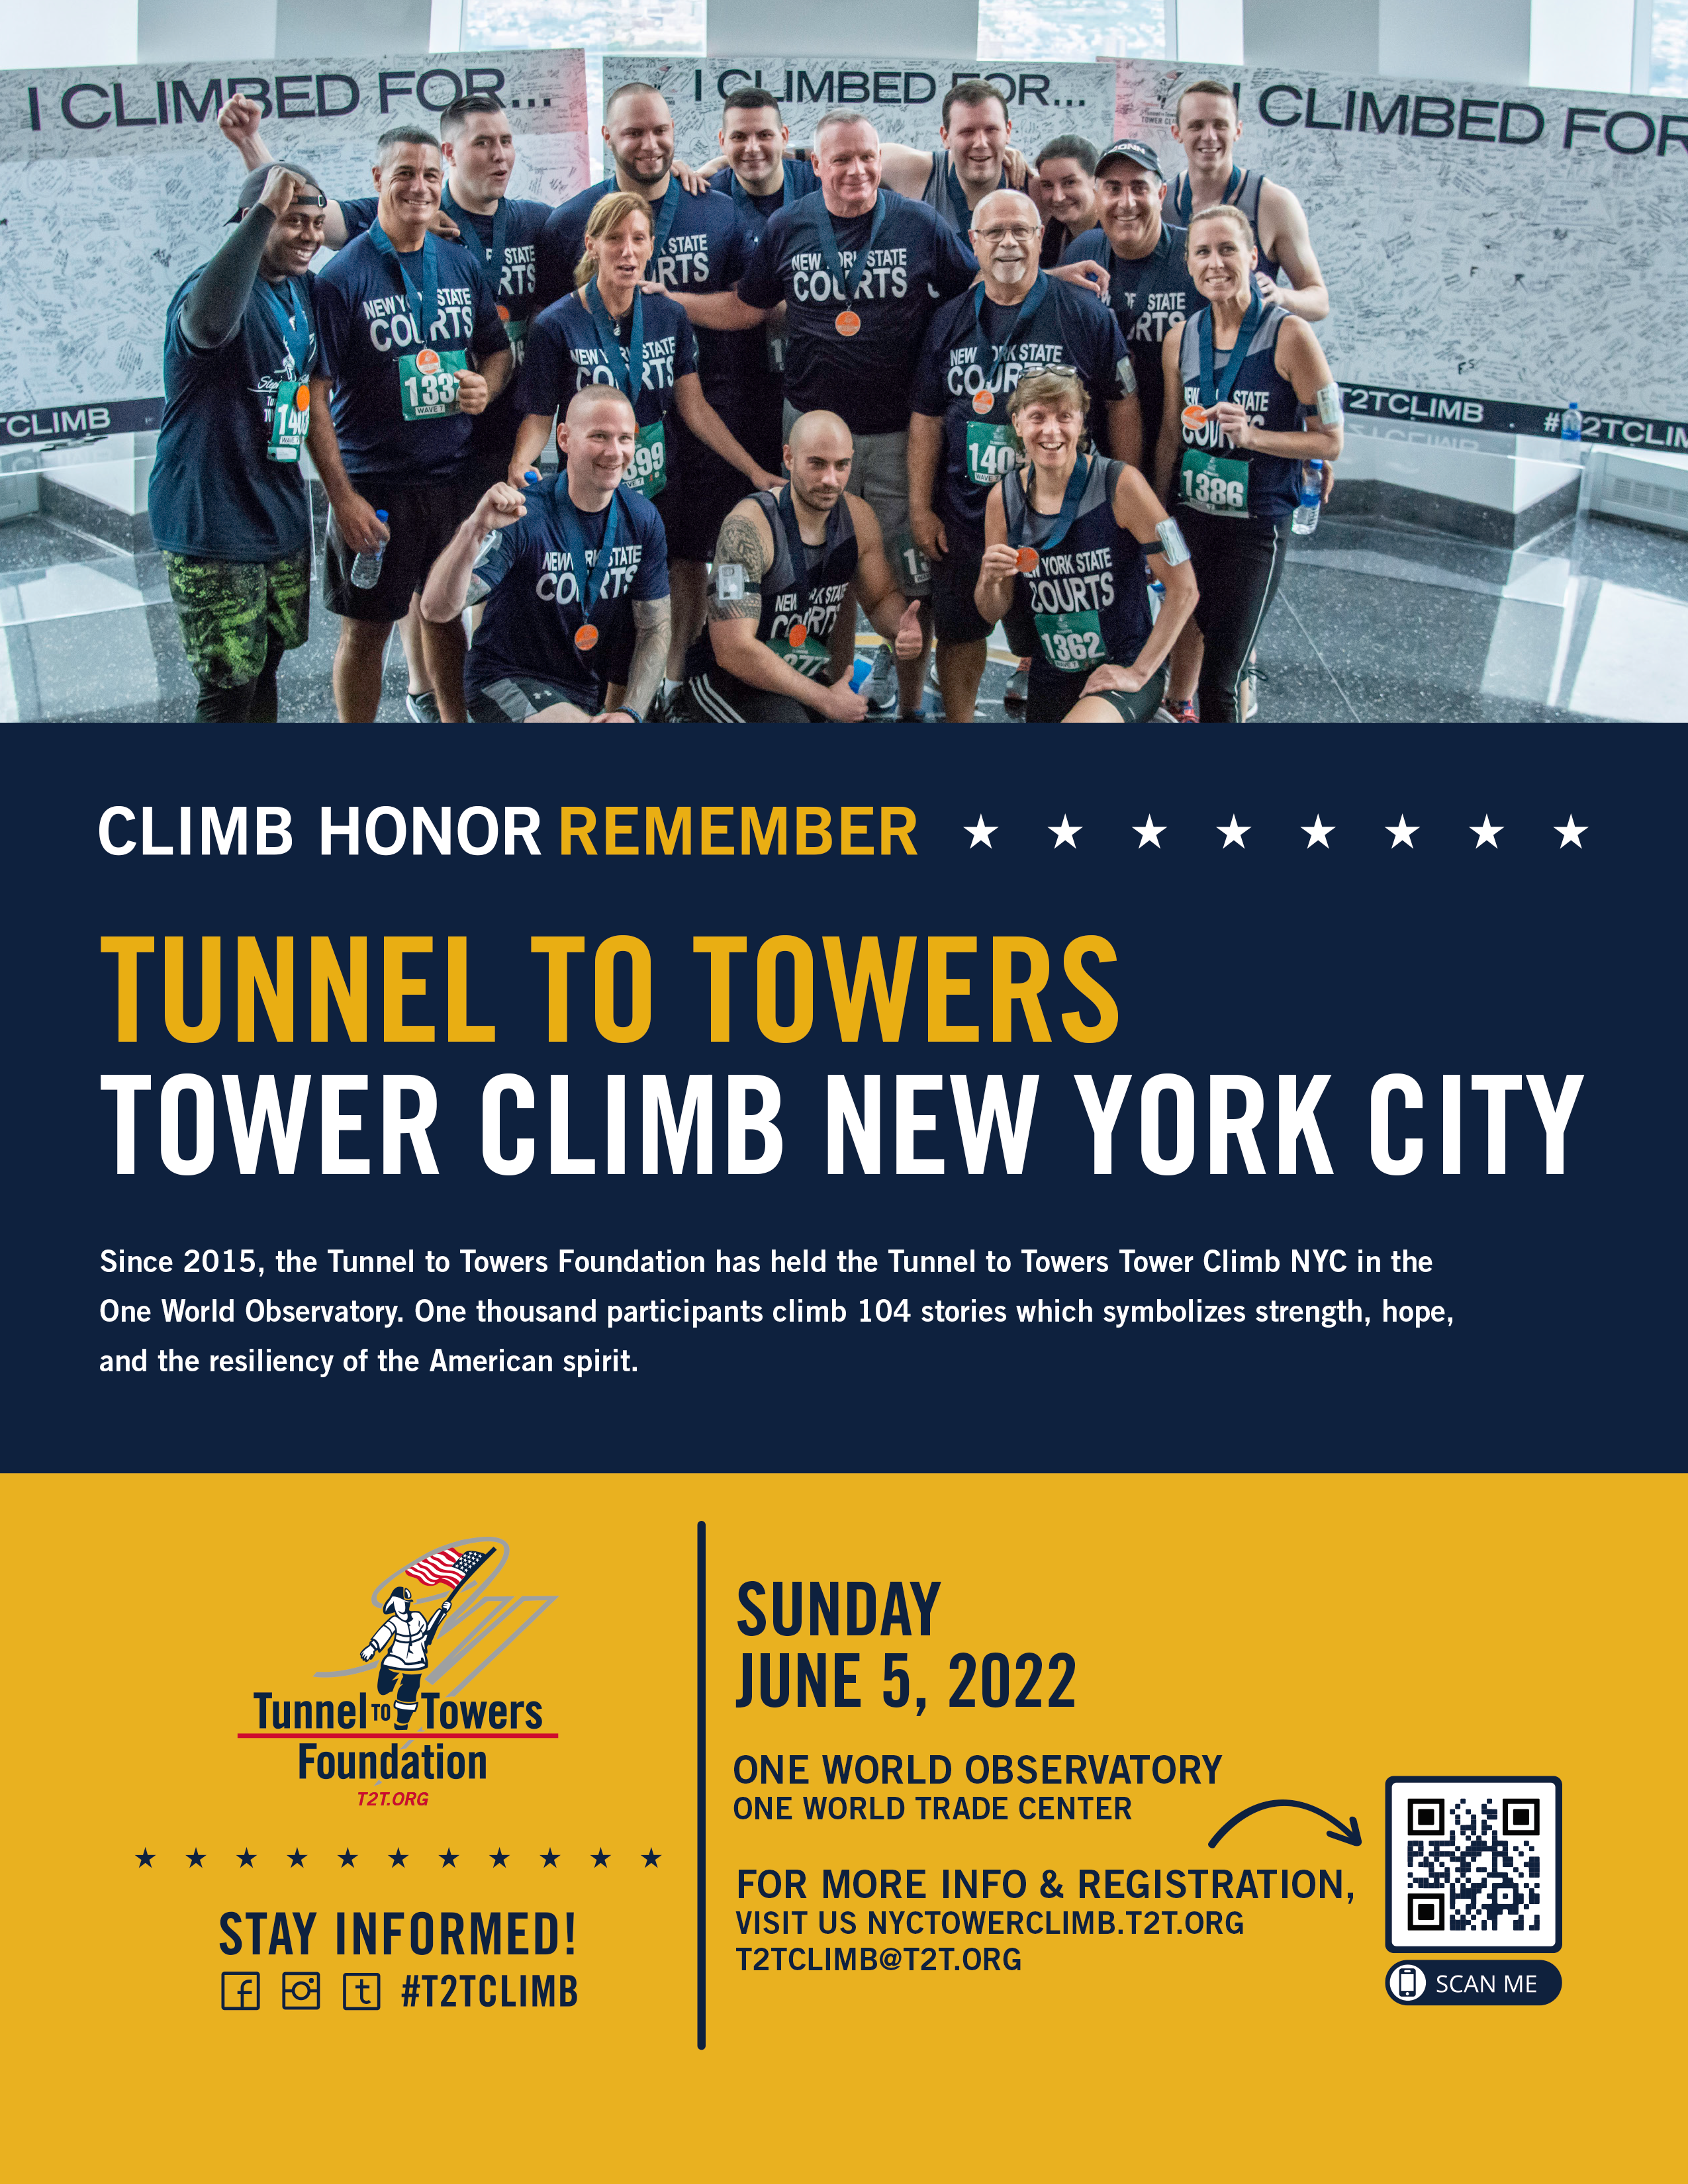 The Tunnel to Towers Foundation Tower Climb Returns To New York City